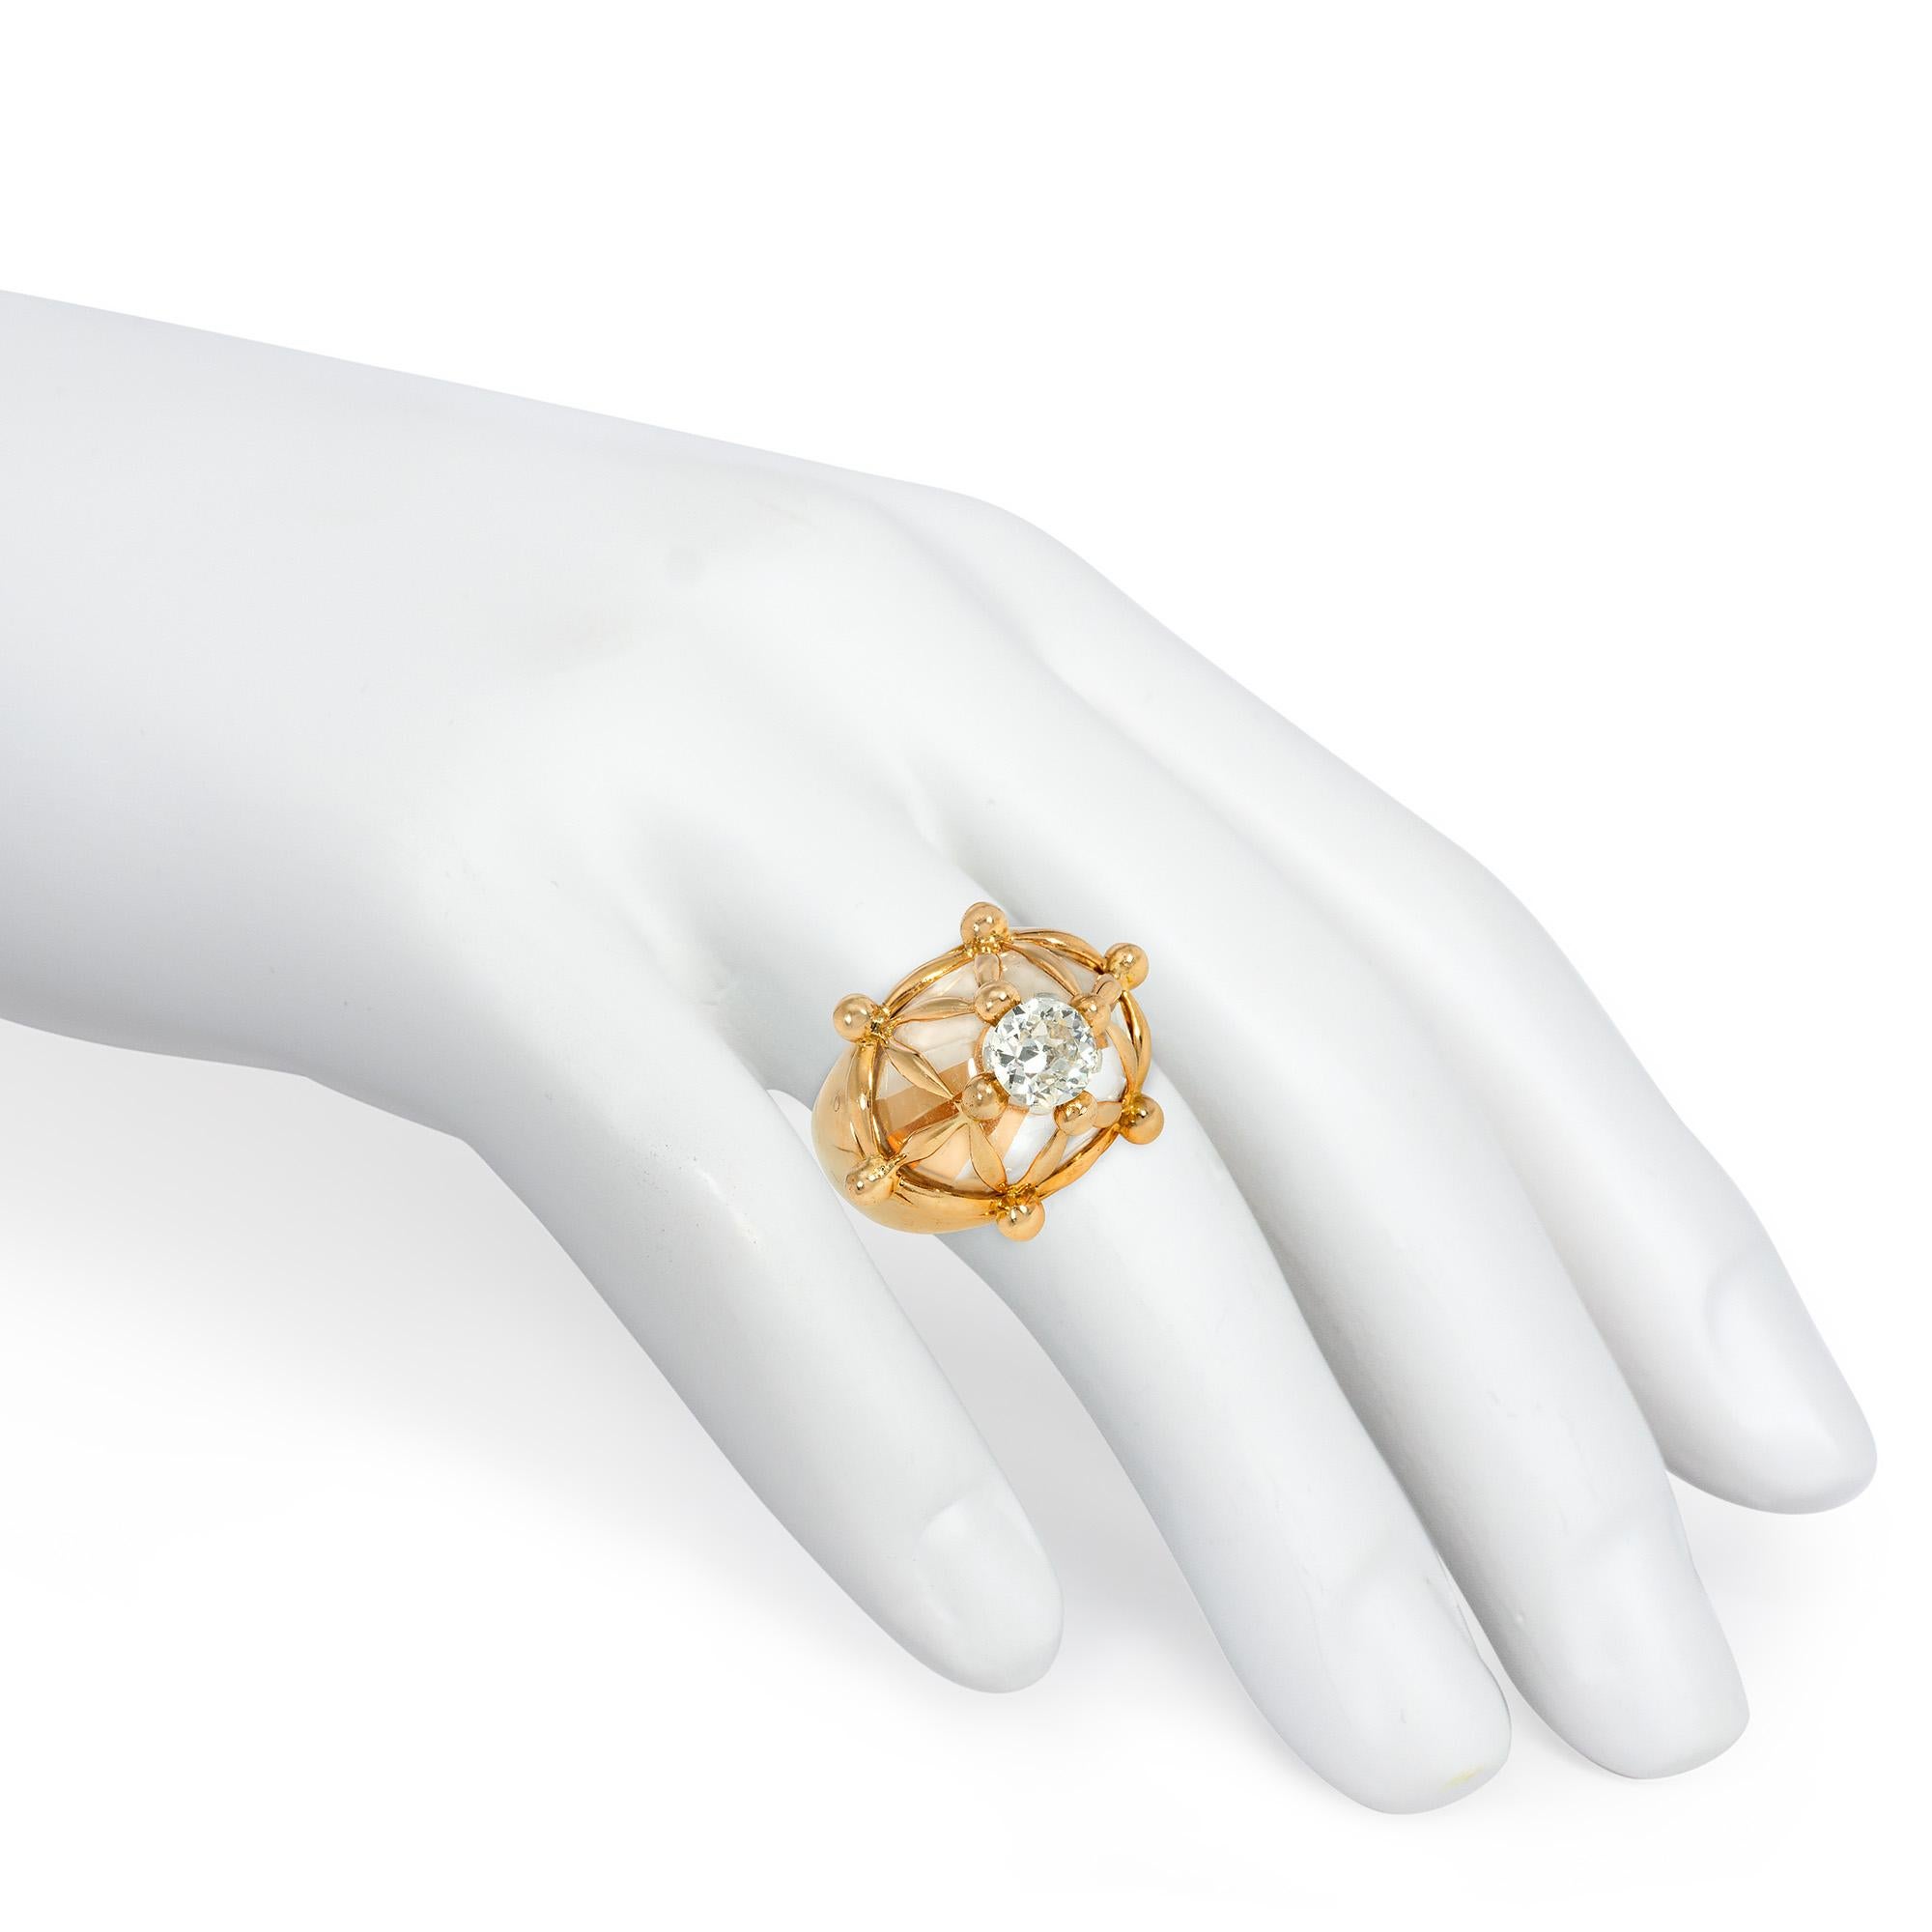 French 1960s Bombé Gold, Rock Crystal, and Diamond Ring with Lattice Design In Good Condition For Sale In New York, NY